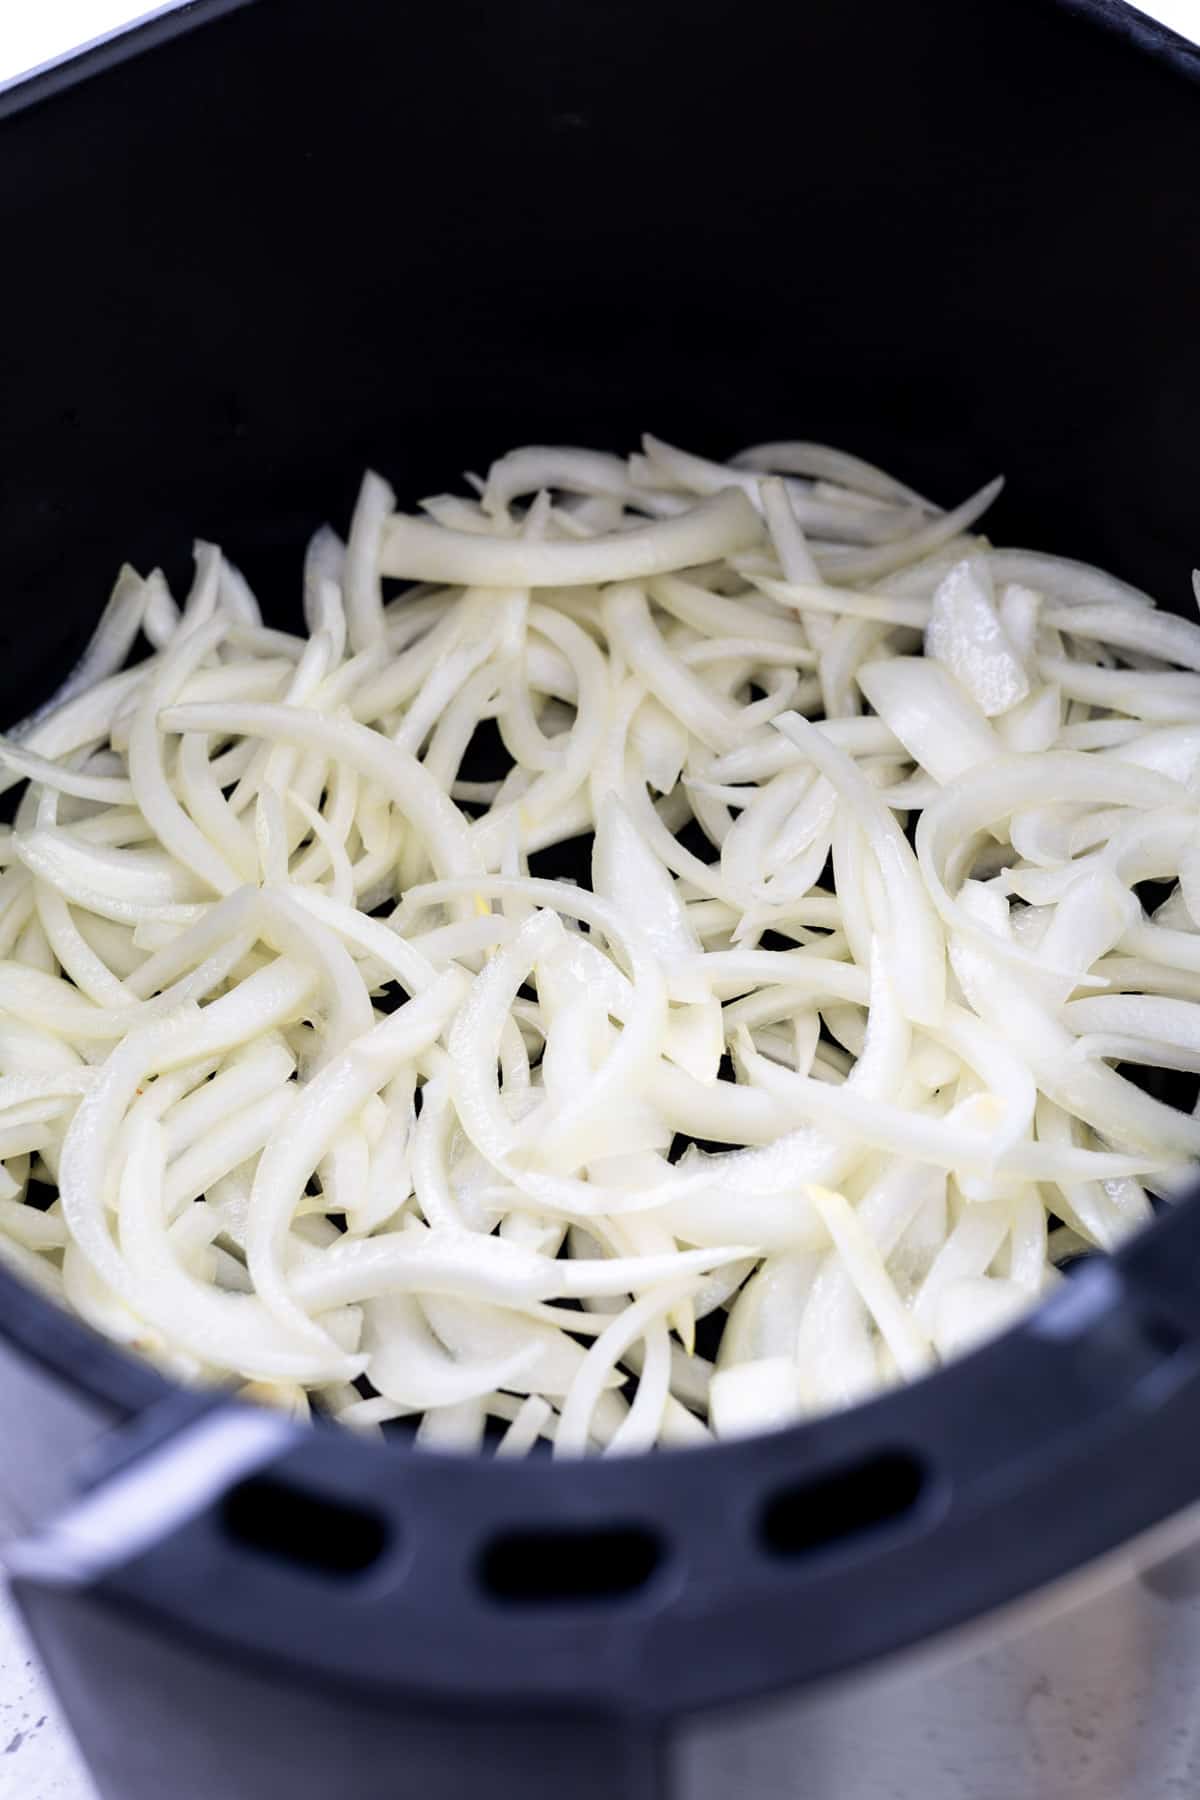 Oil-coated raw onion slices in an air fryer basket.